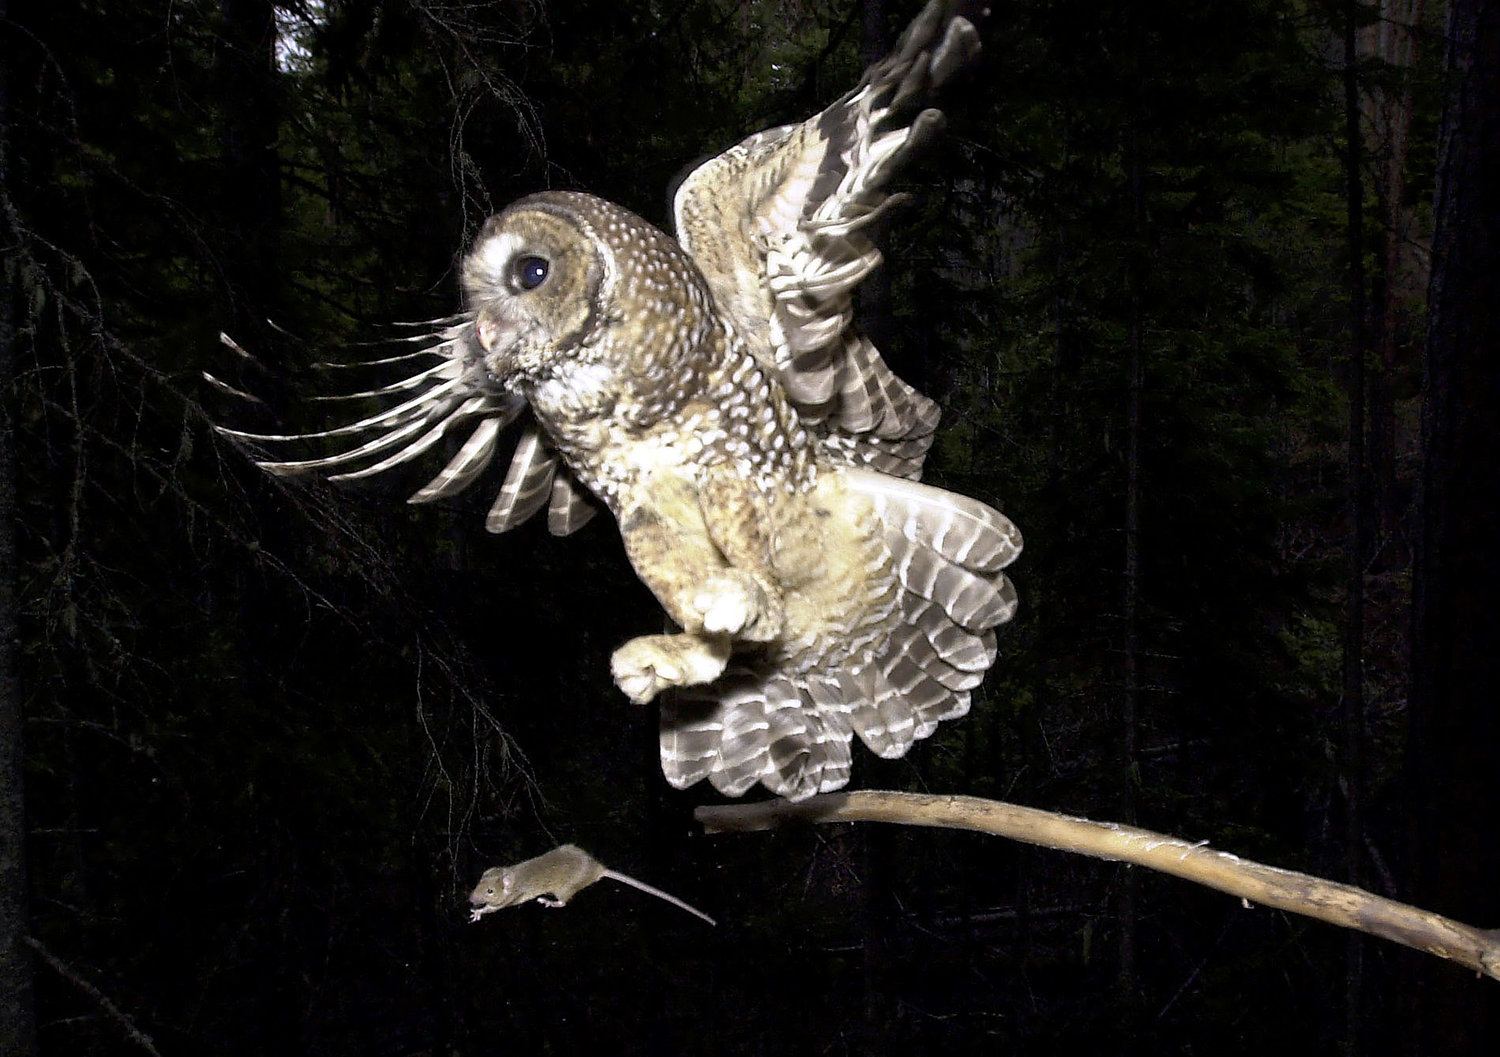 FILE -- In a May 8, 2003, file photo, a northern spotted owl named Obsidian by U.S. Forest Service employees flies after an elusive mouse jumping off the end of a stick in the Deschutes National Forest near Camp Sherman, Ore.